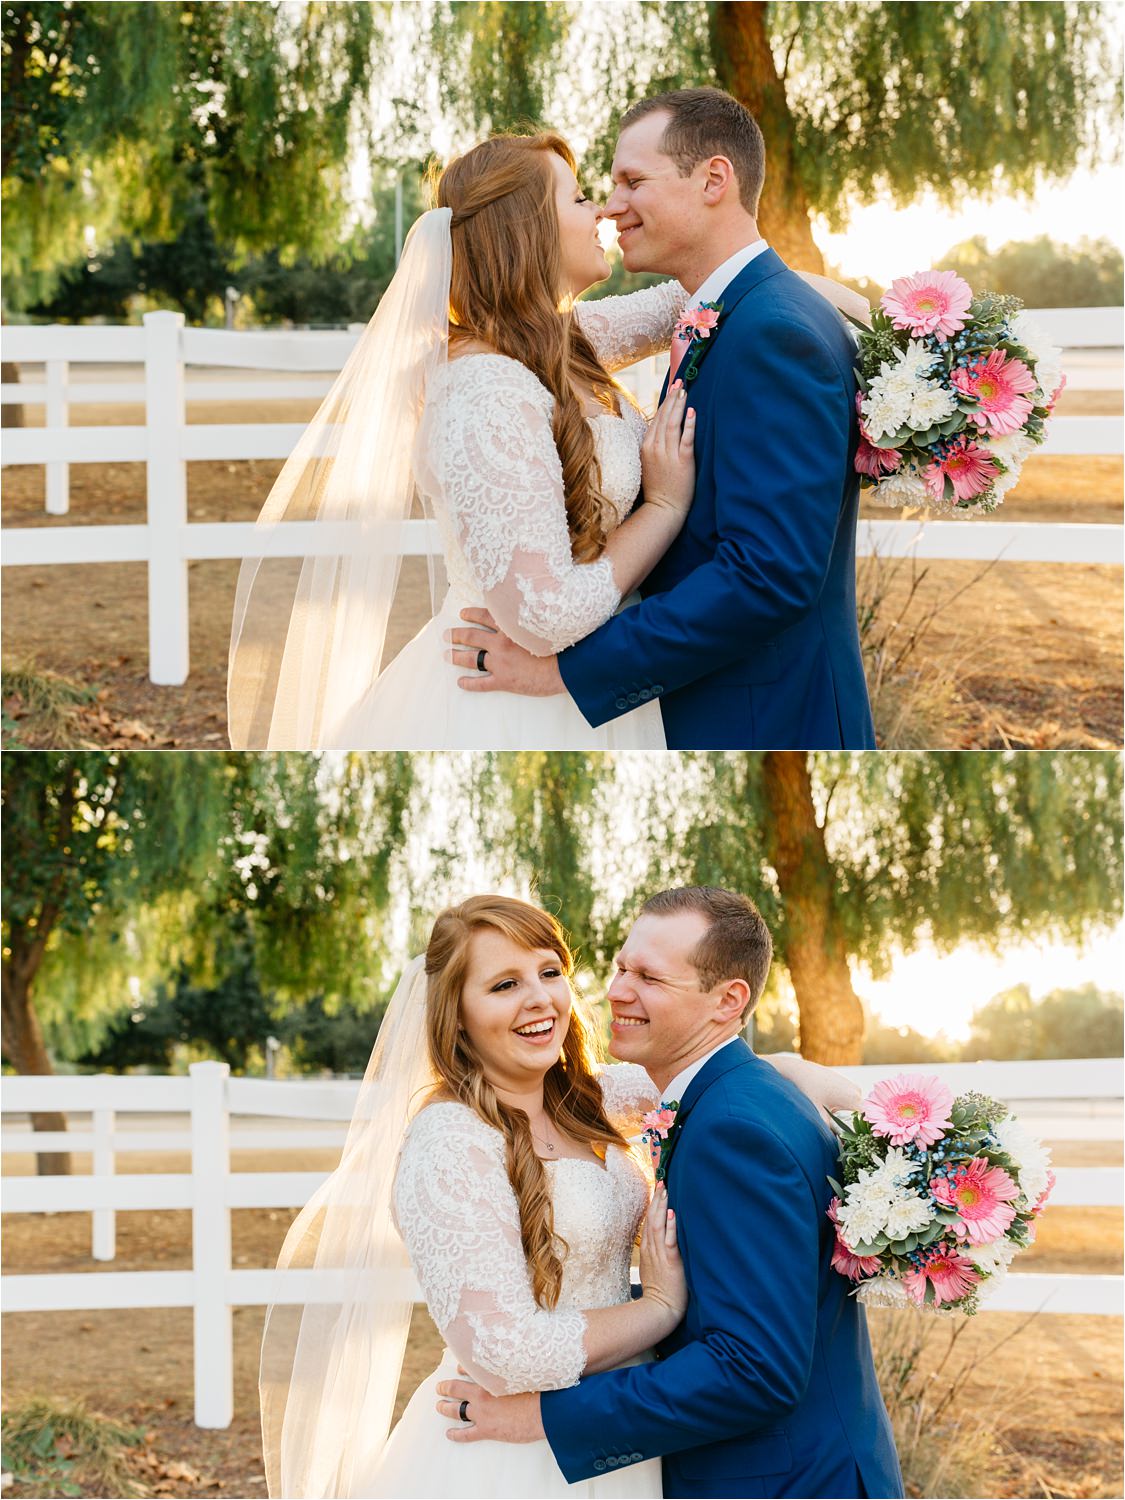 Cute Couple gets married in the fall at McCoy Equestrian Center - https://brittneyhannonphotography.com